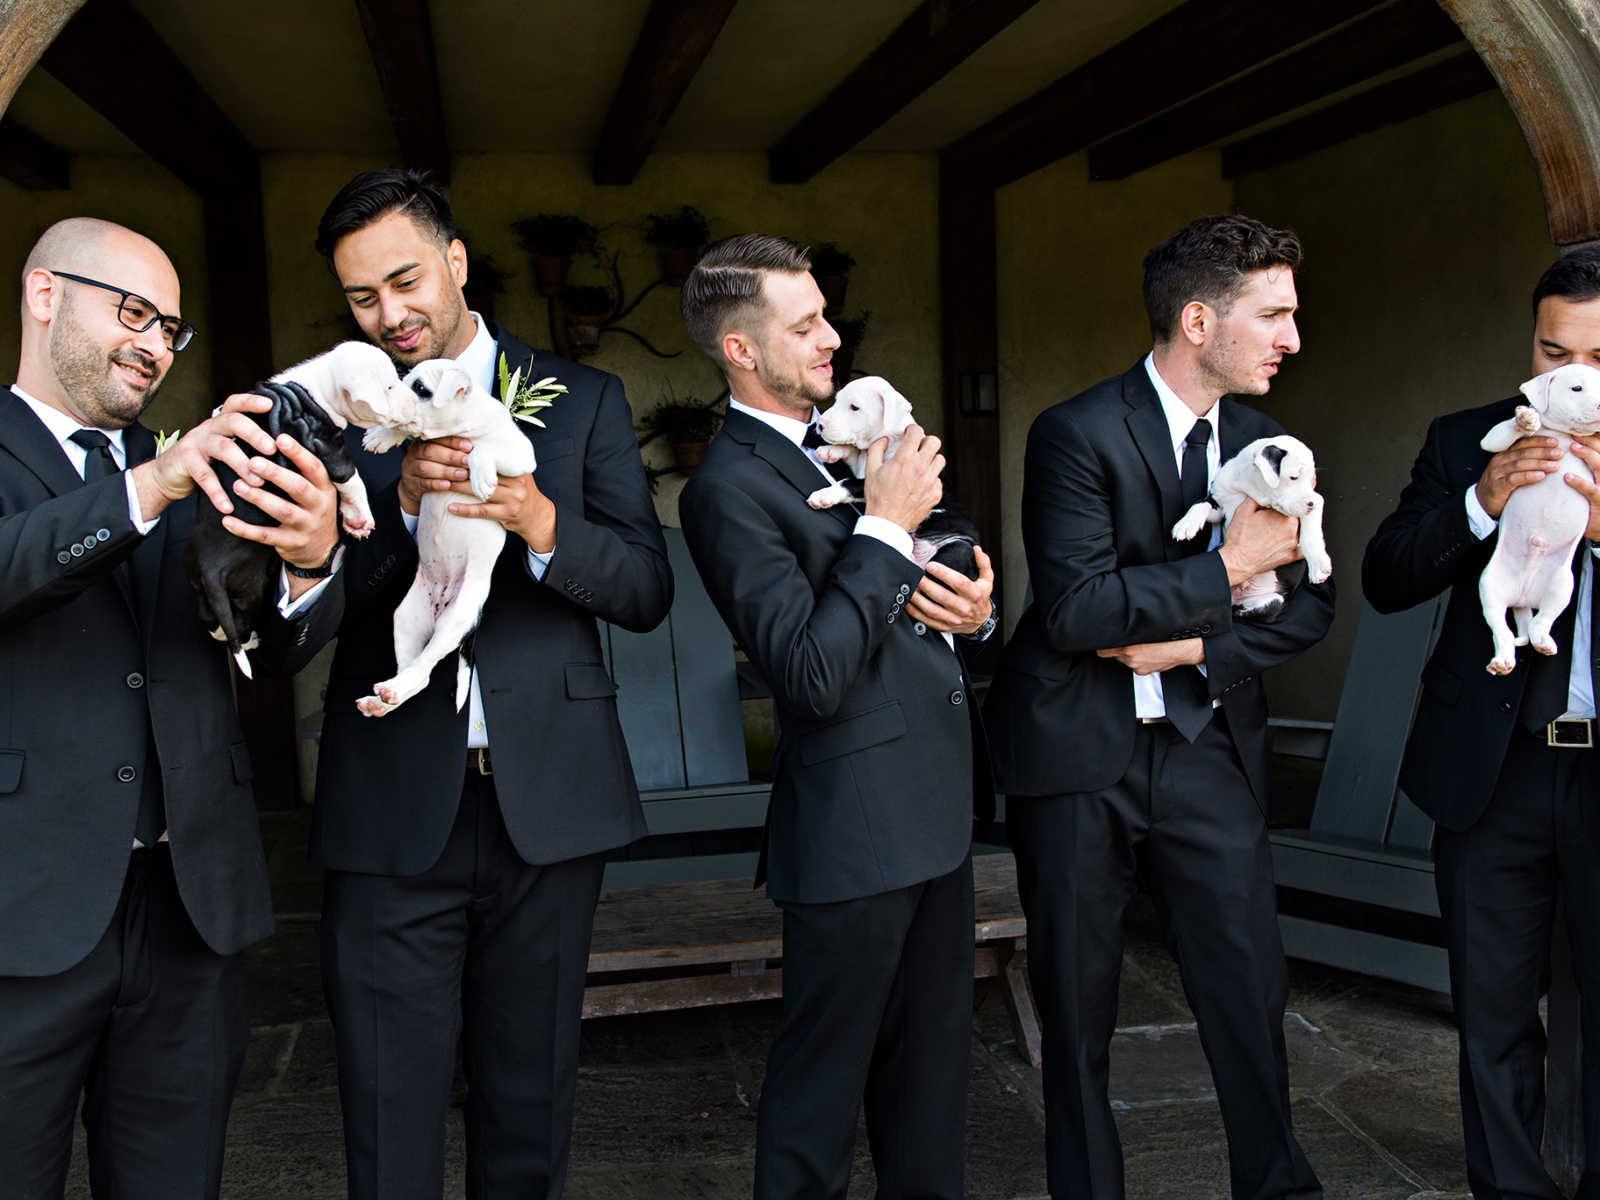 Two groomsmen hold up rescue puppies so that they are kissing while three others hold them to their chests